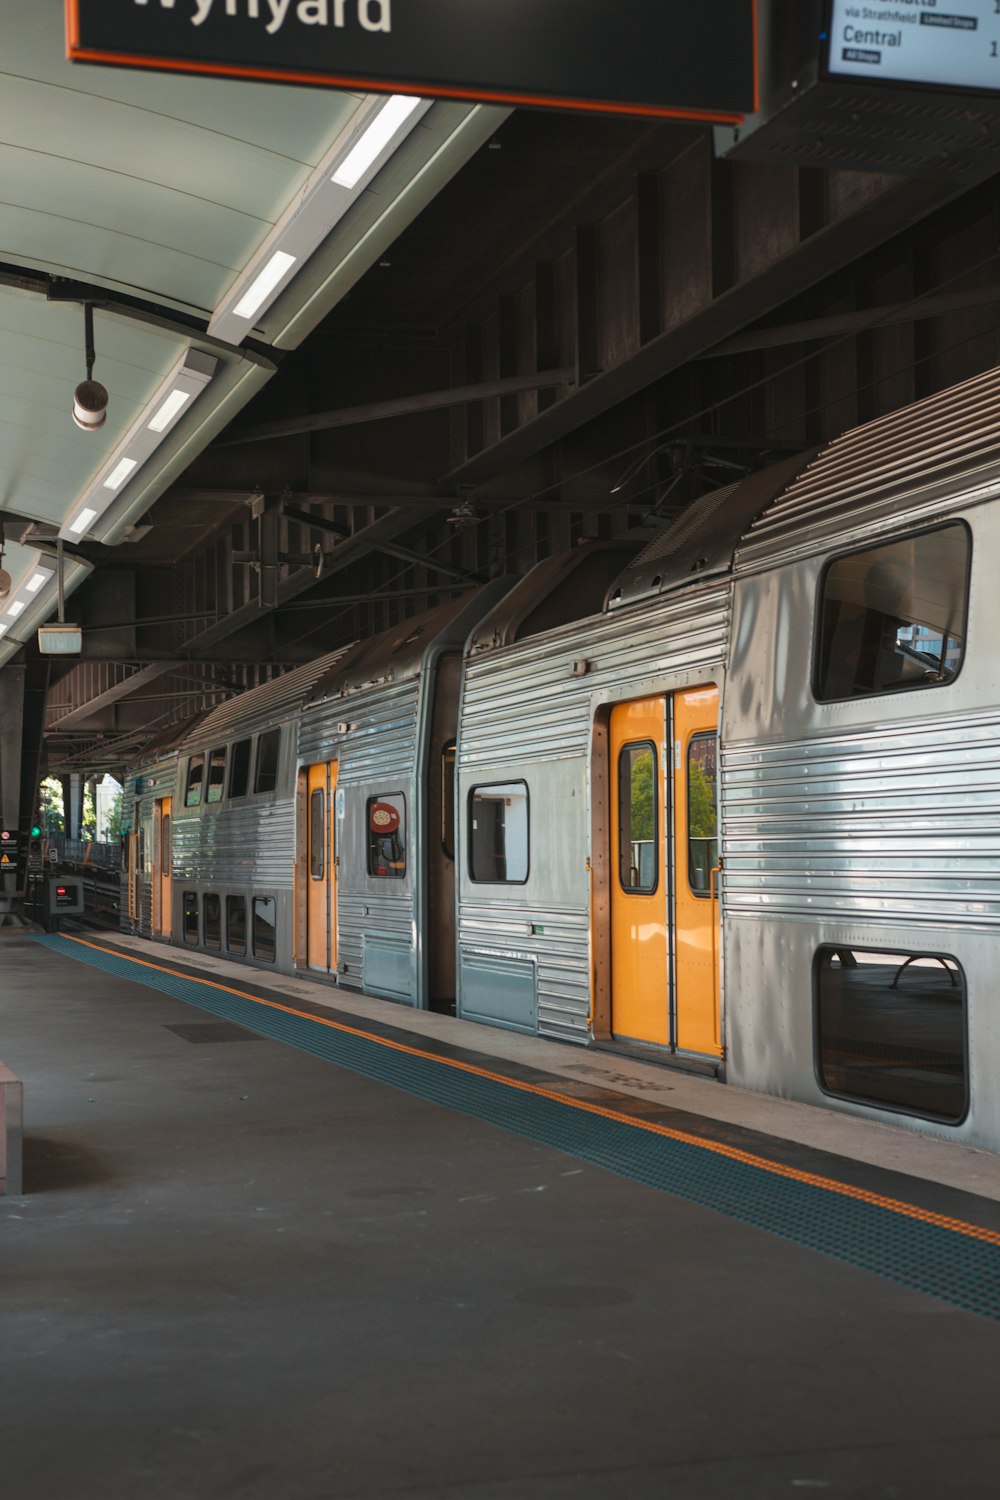 a train is parked in a station